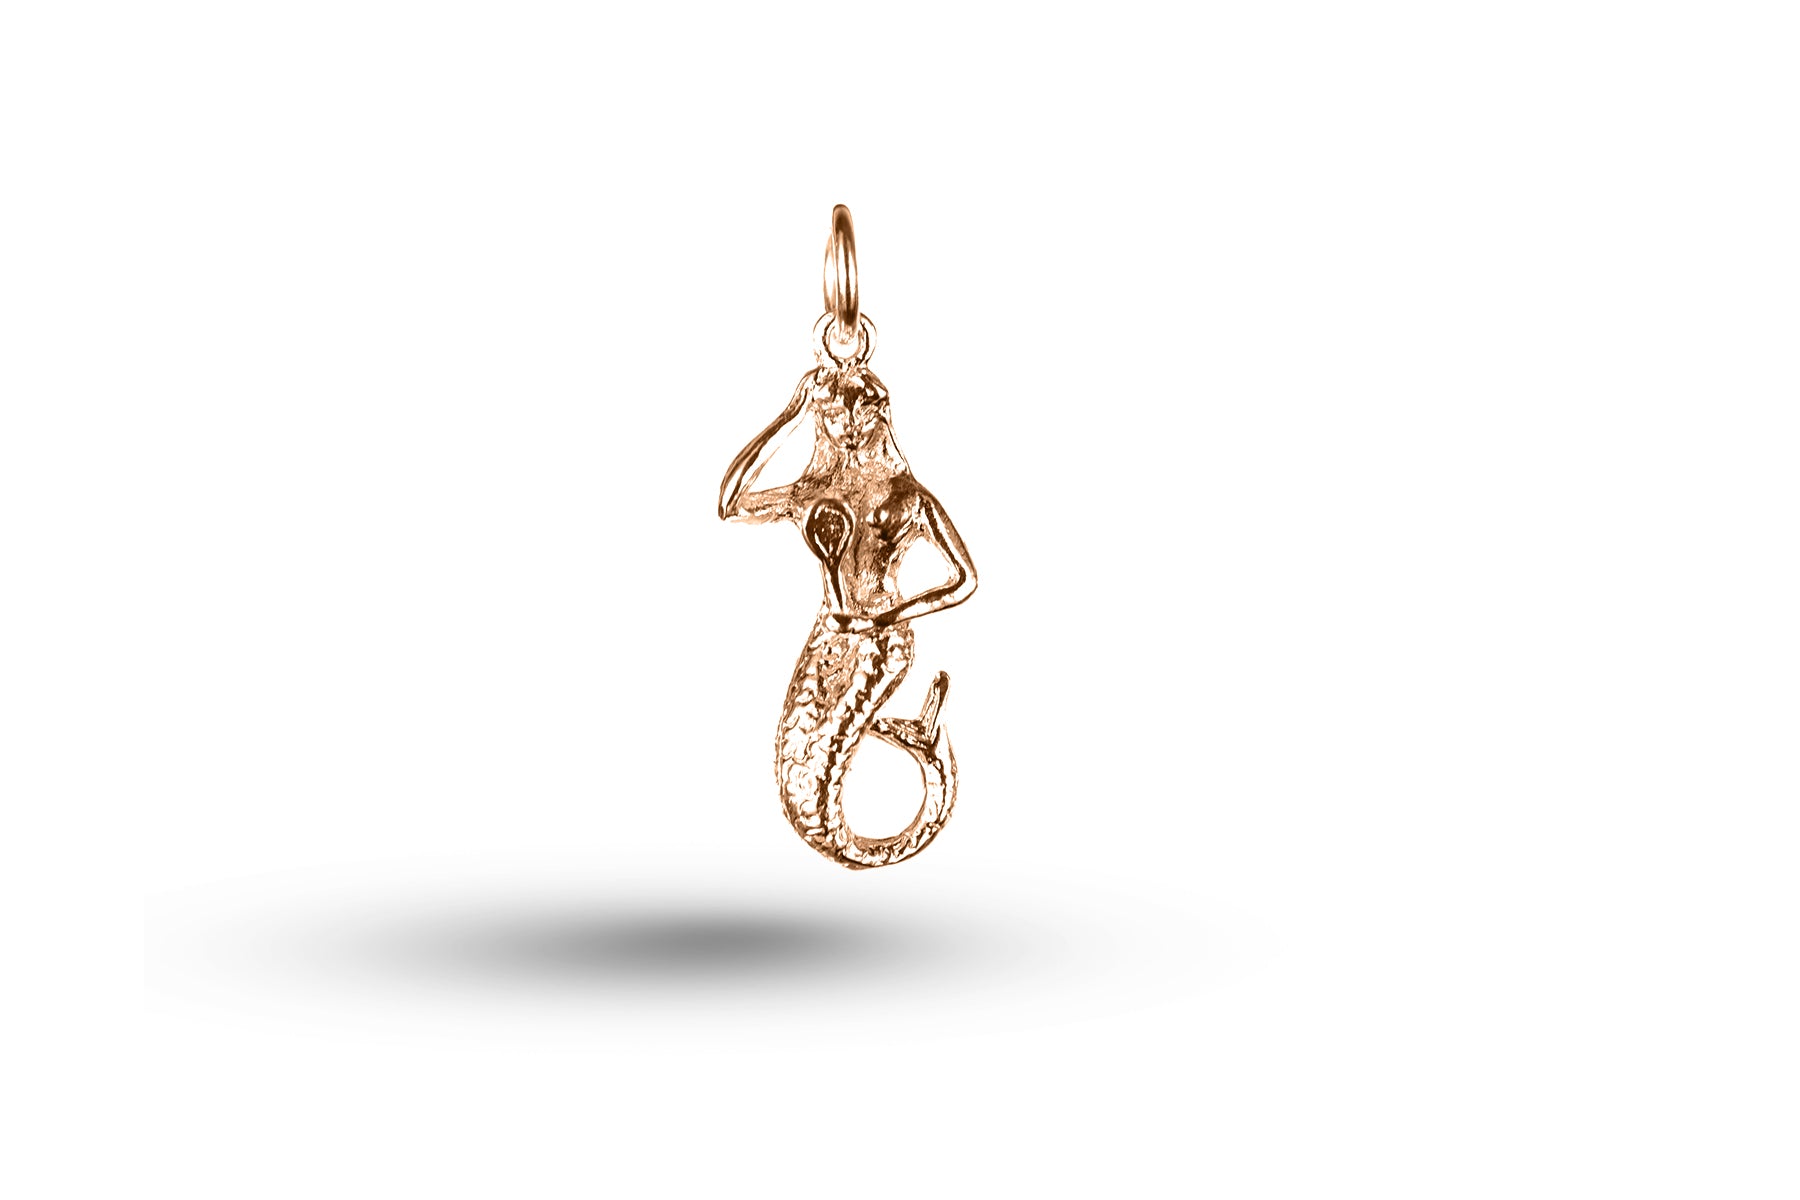 Rose gold Mermaid and Looking Glass charm.